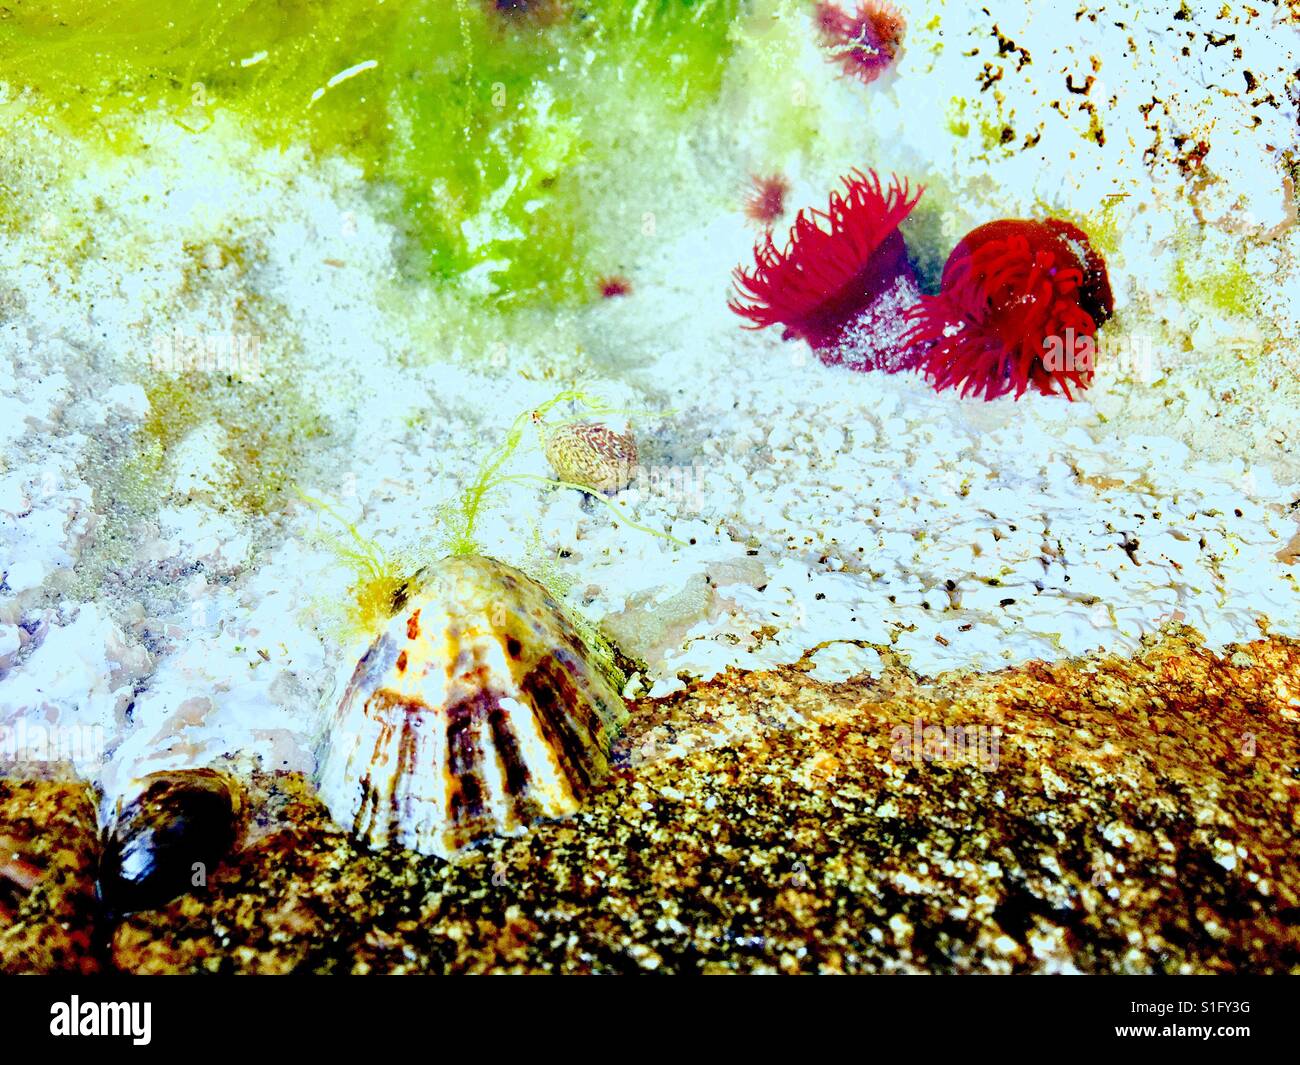 Two anemones and a small shell on the beach rock Stock Photo